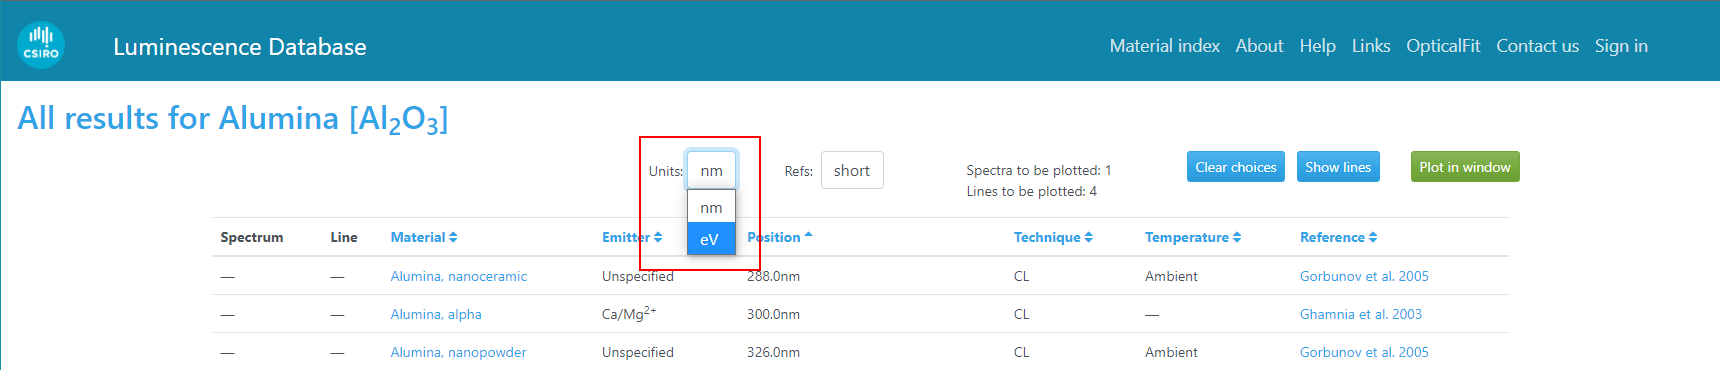 Changing the position units from nm (for wavelength) to eV (for energy) using the 'Units' dropdown list.